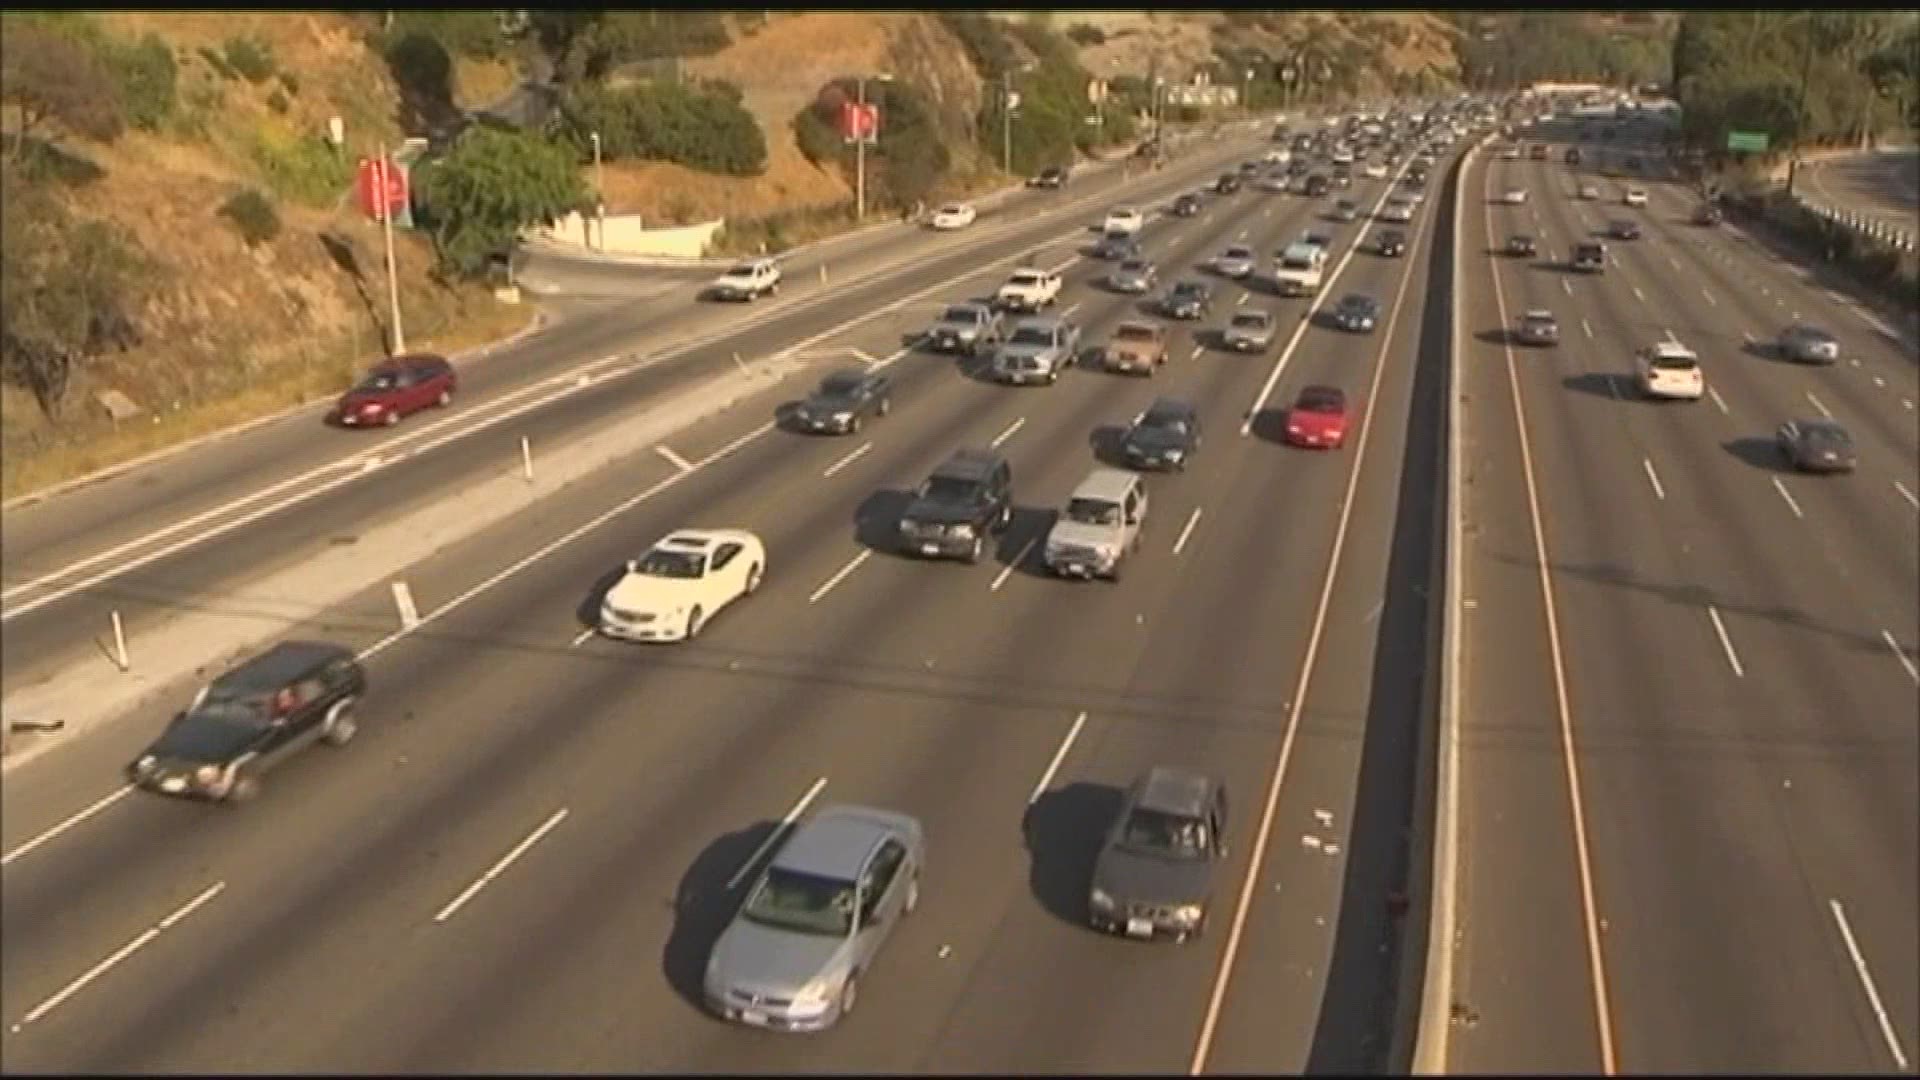 AAA warns that traffic congestion could nearly double in some areas as travelers head out for Memorial Day.